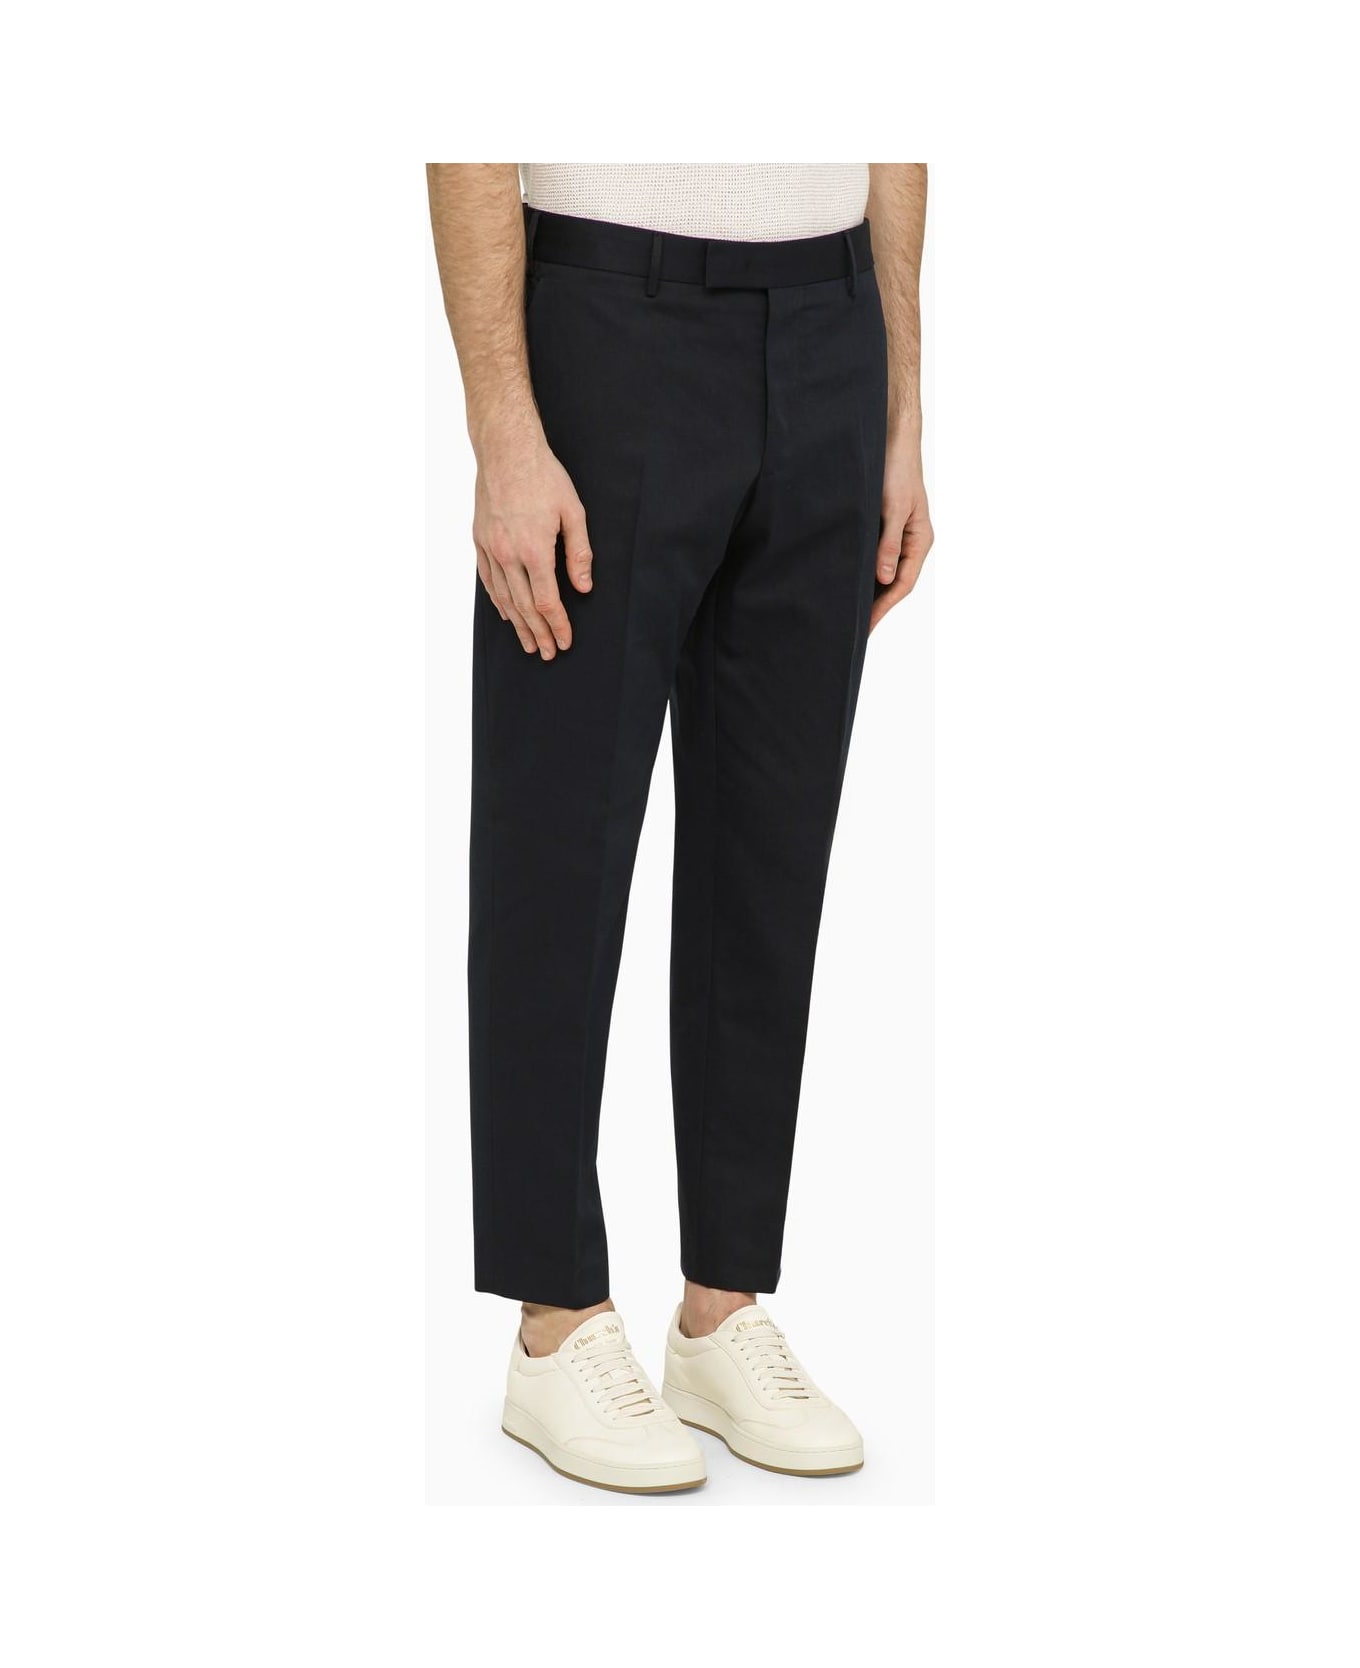 PT Torino Navy Blue Slim Trousers In Cotton And Linen - 0360 BLUE